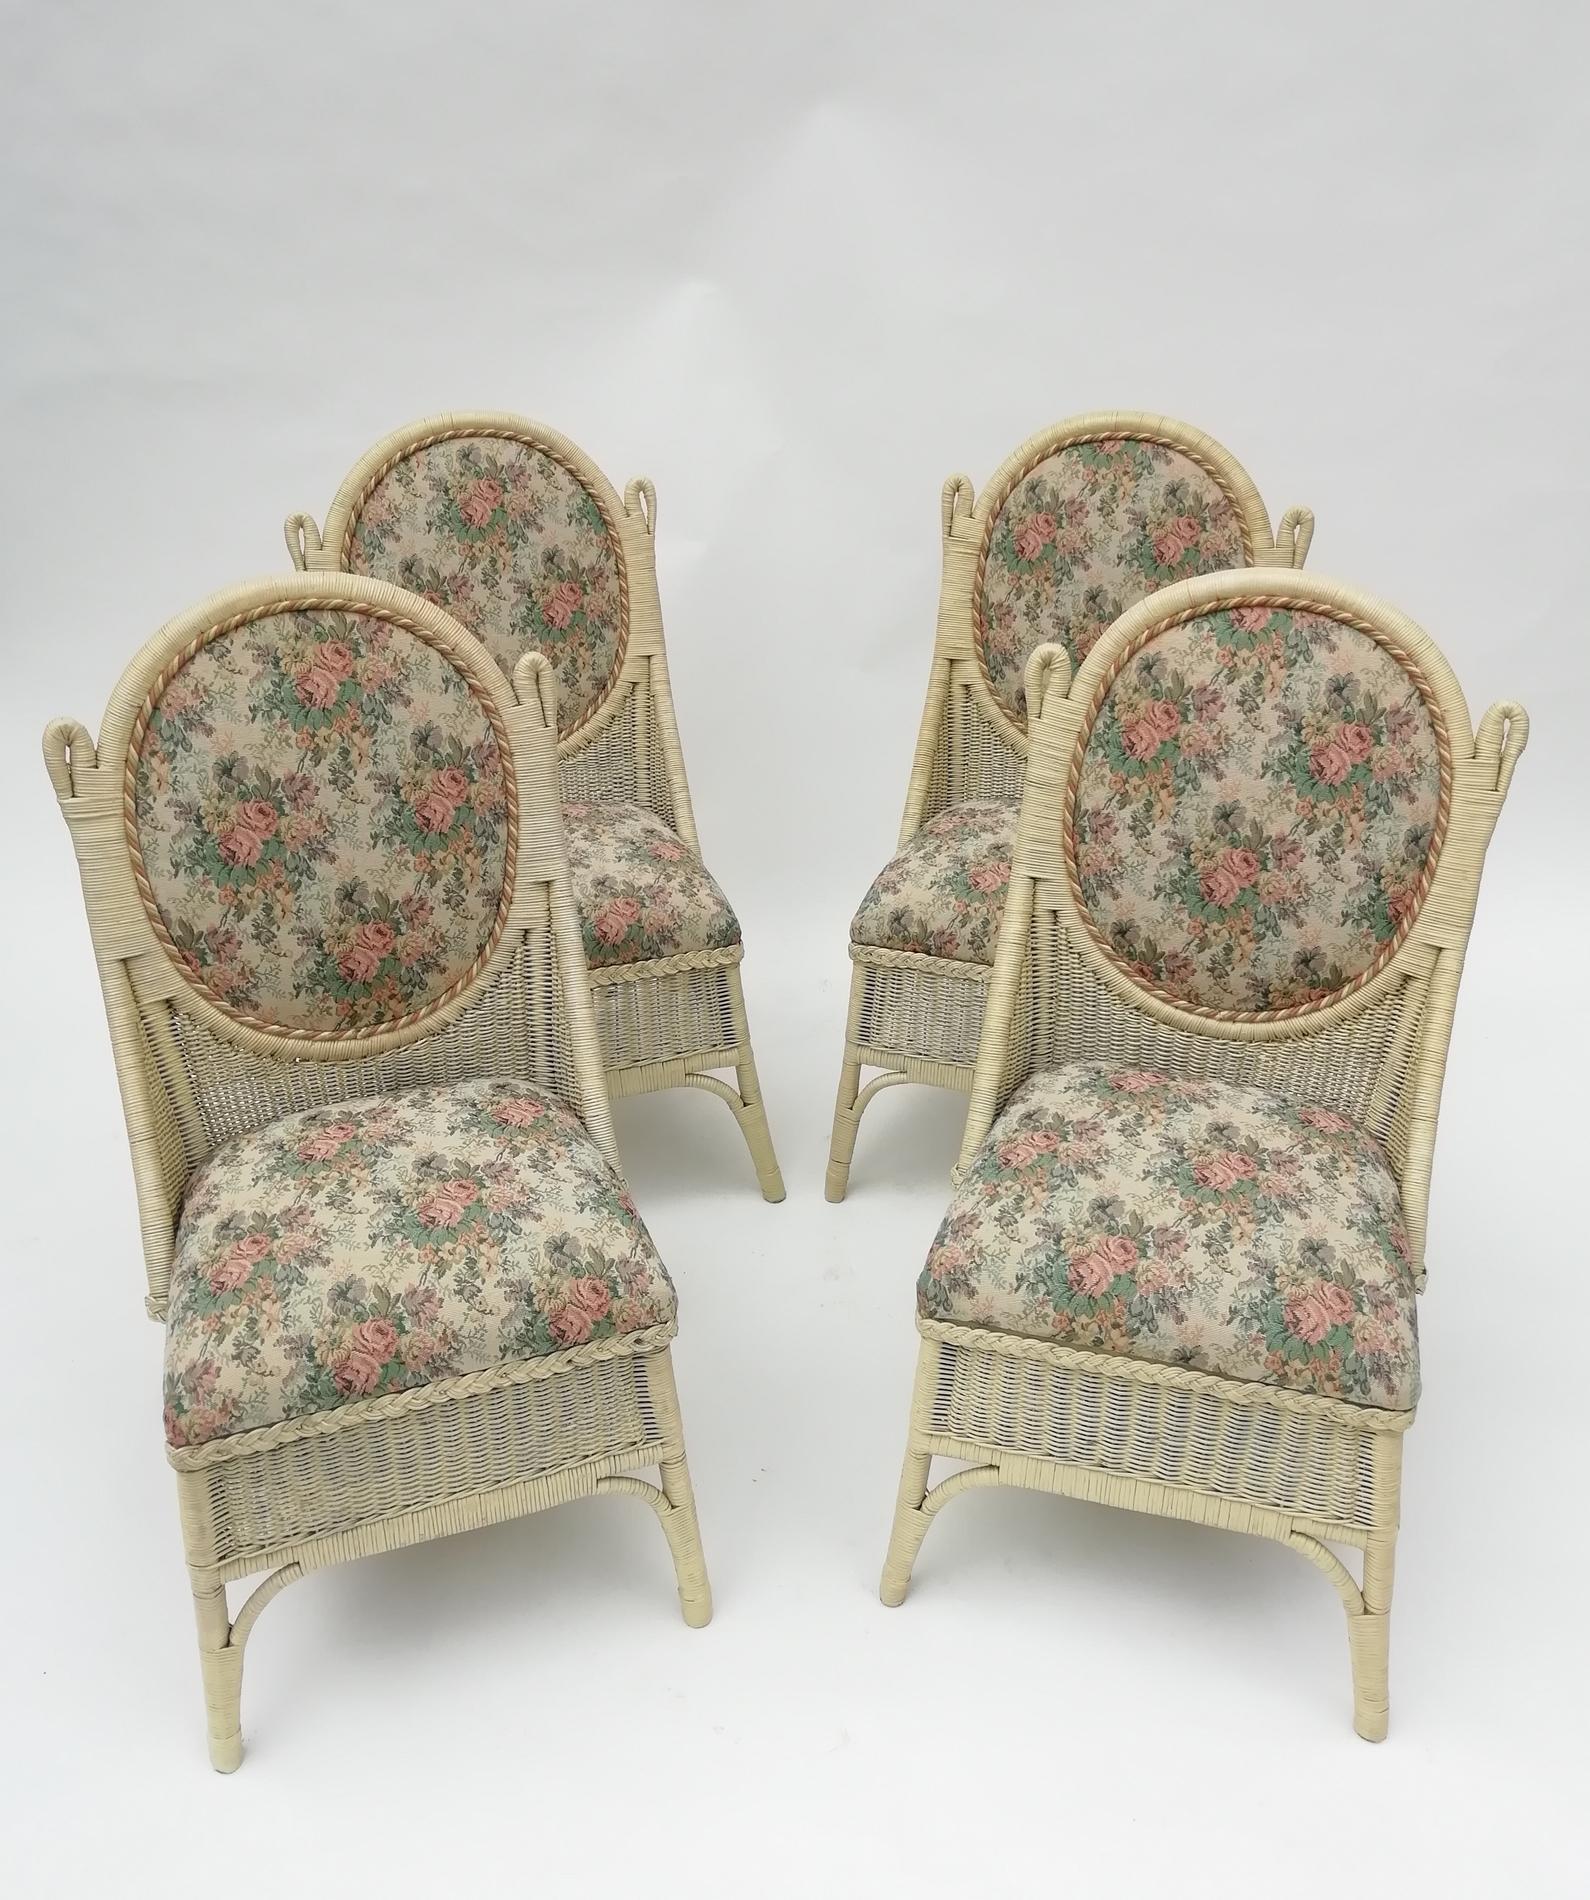 Painted Set of White Rattan Seats by Costanzo Luciano Italy, Catania, circa 1920 For Sale